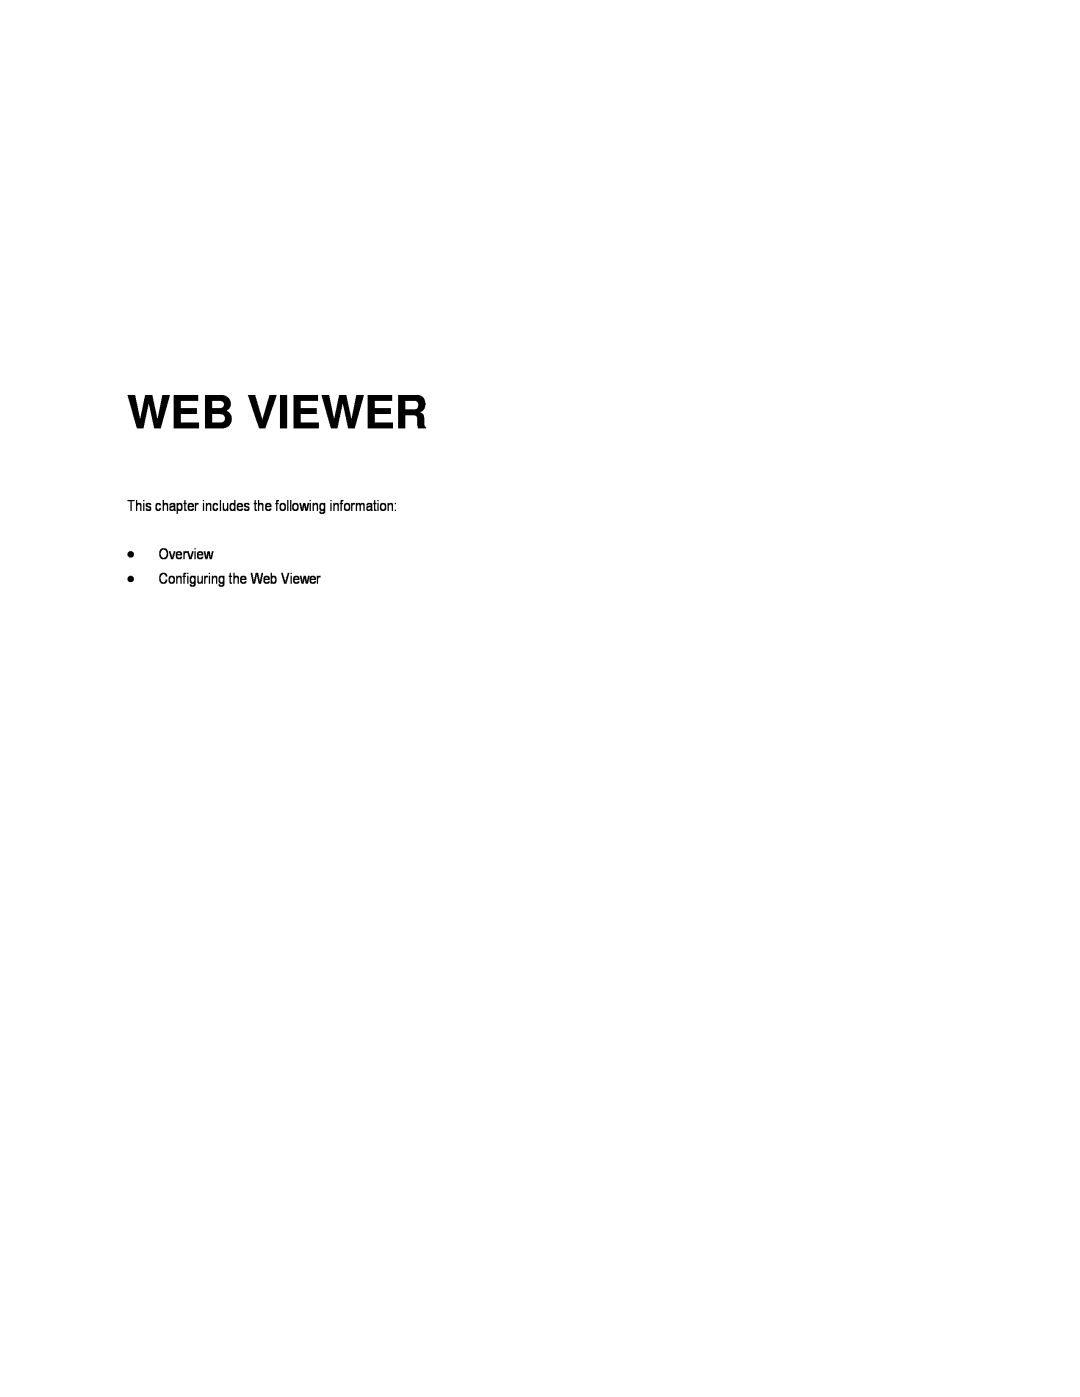 Toshiba HVR8-X, EVR8-X, EVR32-X This chapter includes the following information Overview, Configuring the Web Viewer 